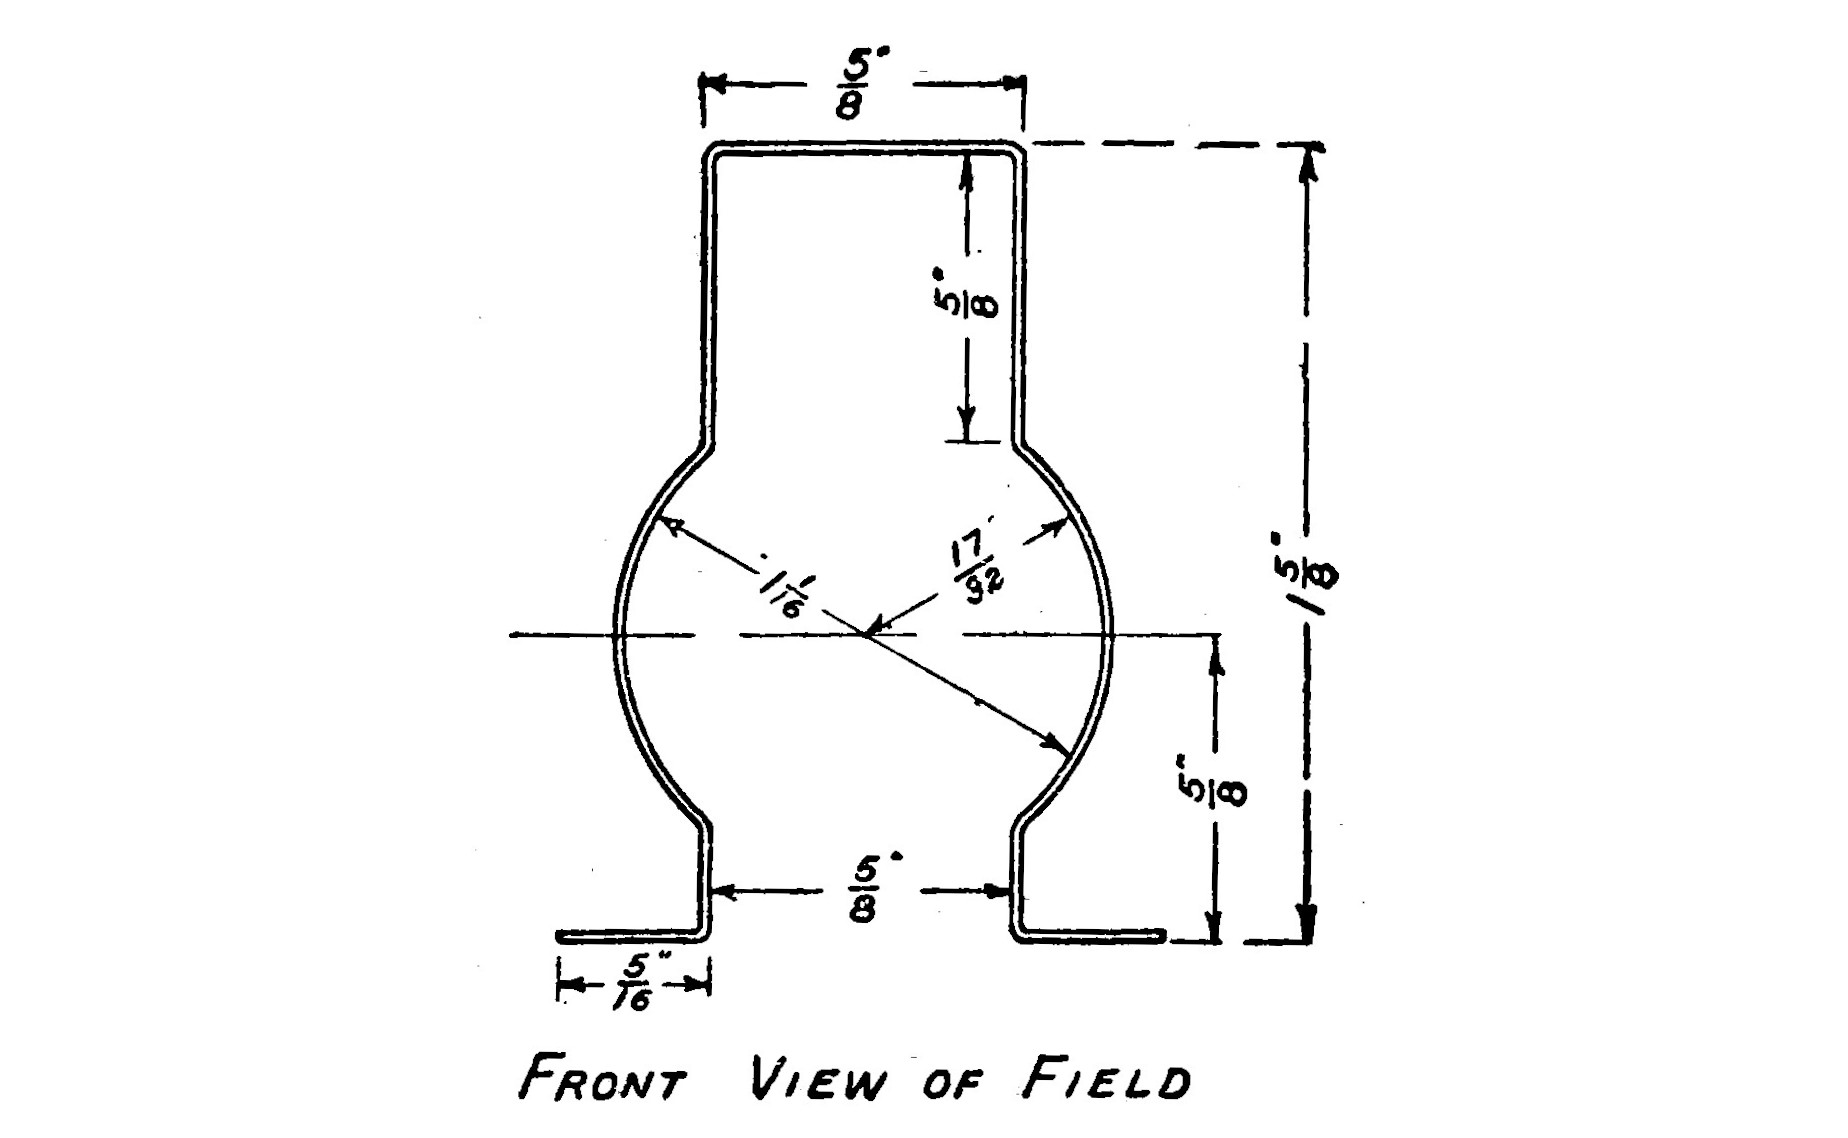 FIG. 10.—A front view of the Field Frame.